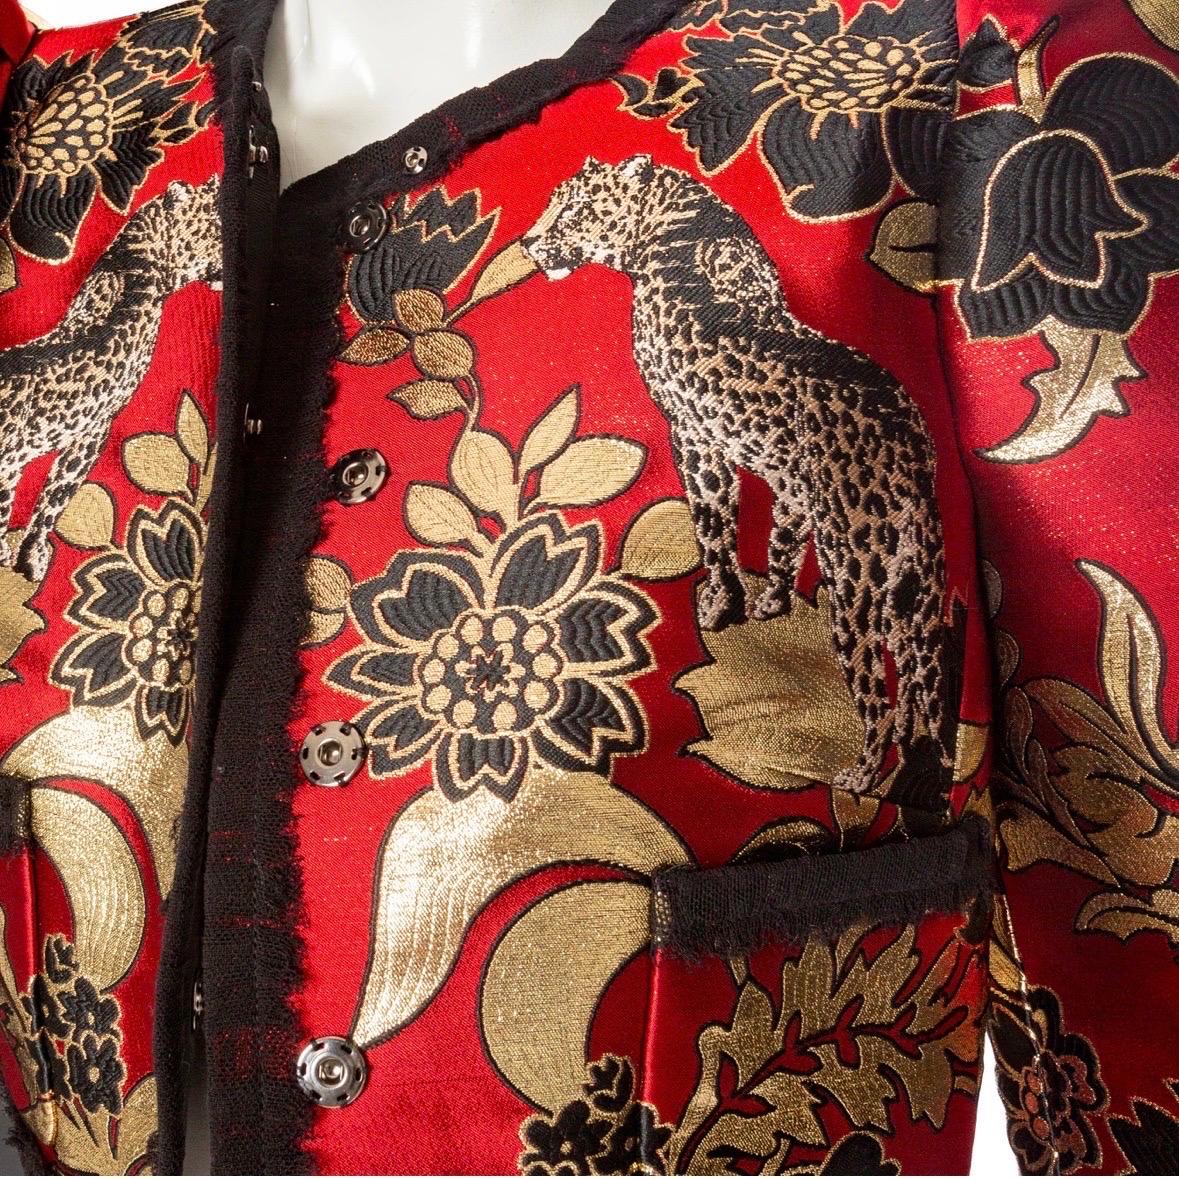 Dolce & Gabbana Gold and Red Leopard Motif Jacquard Jacket and Skirt Set For Sale 2